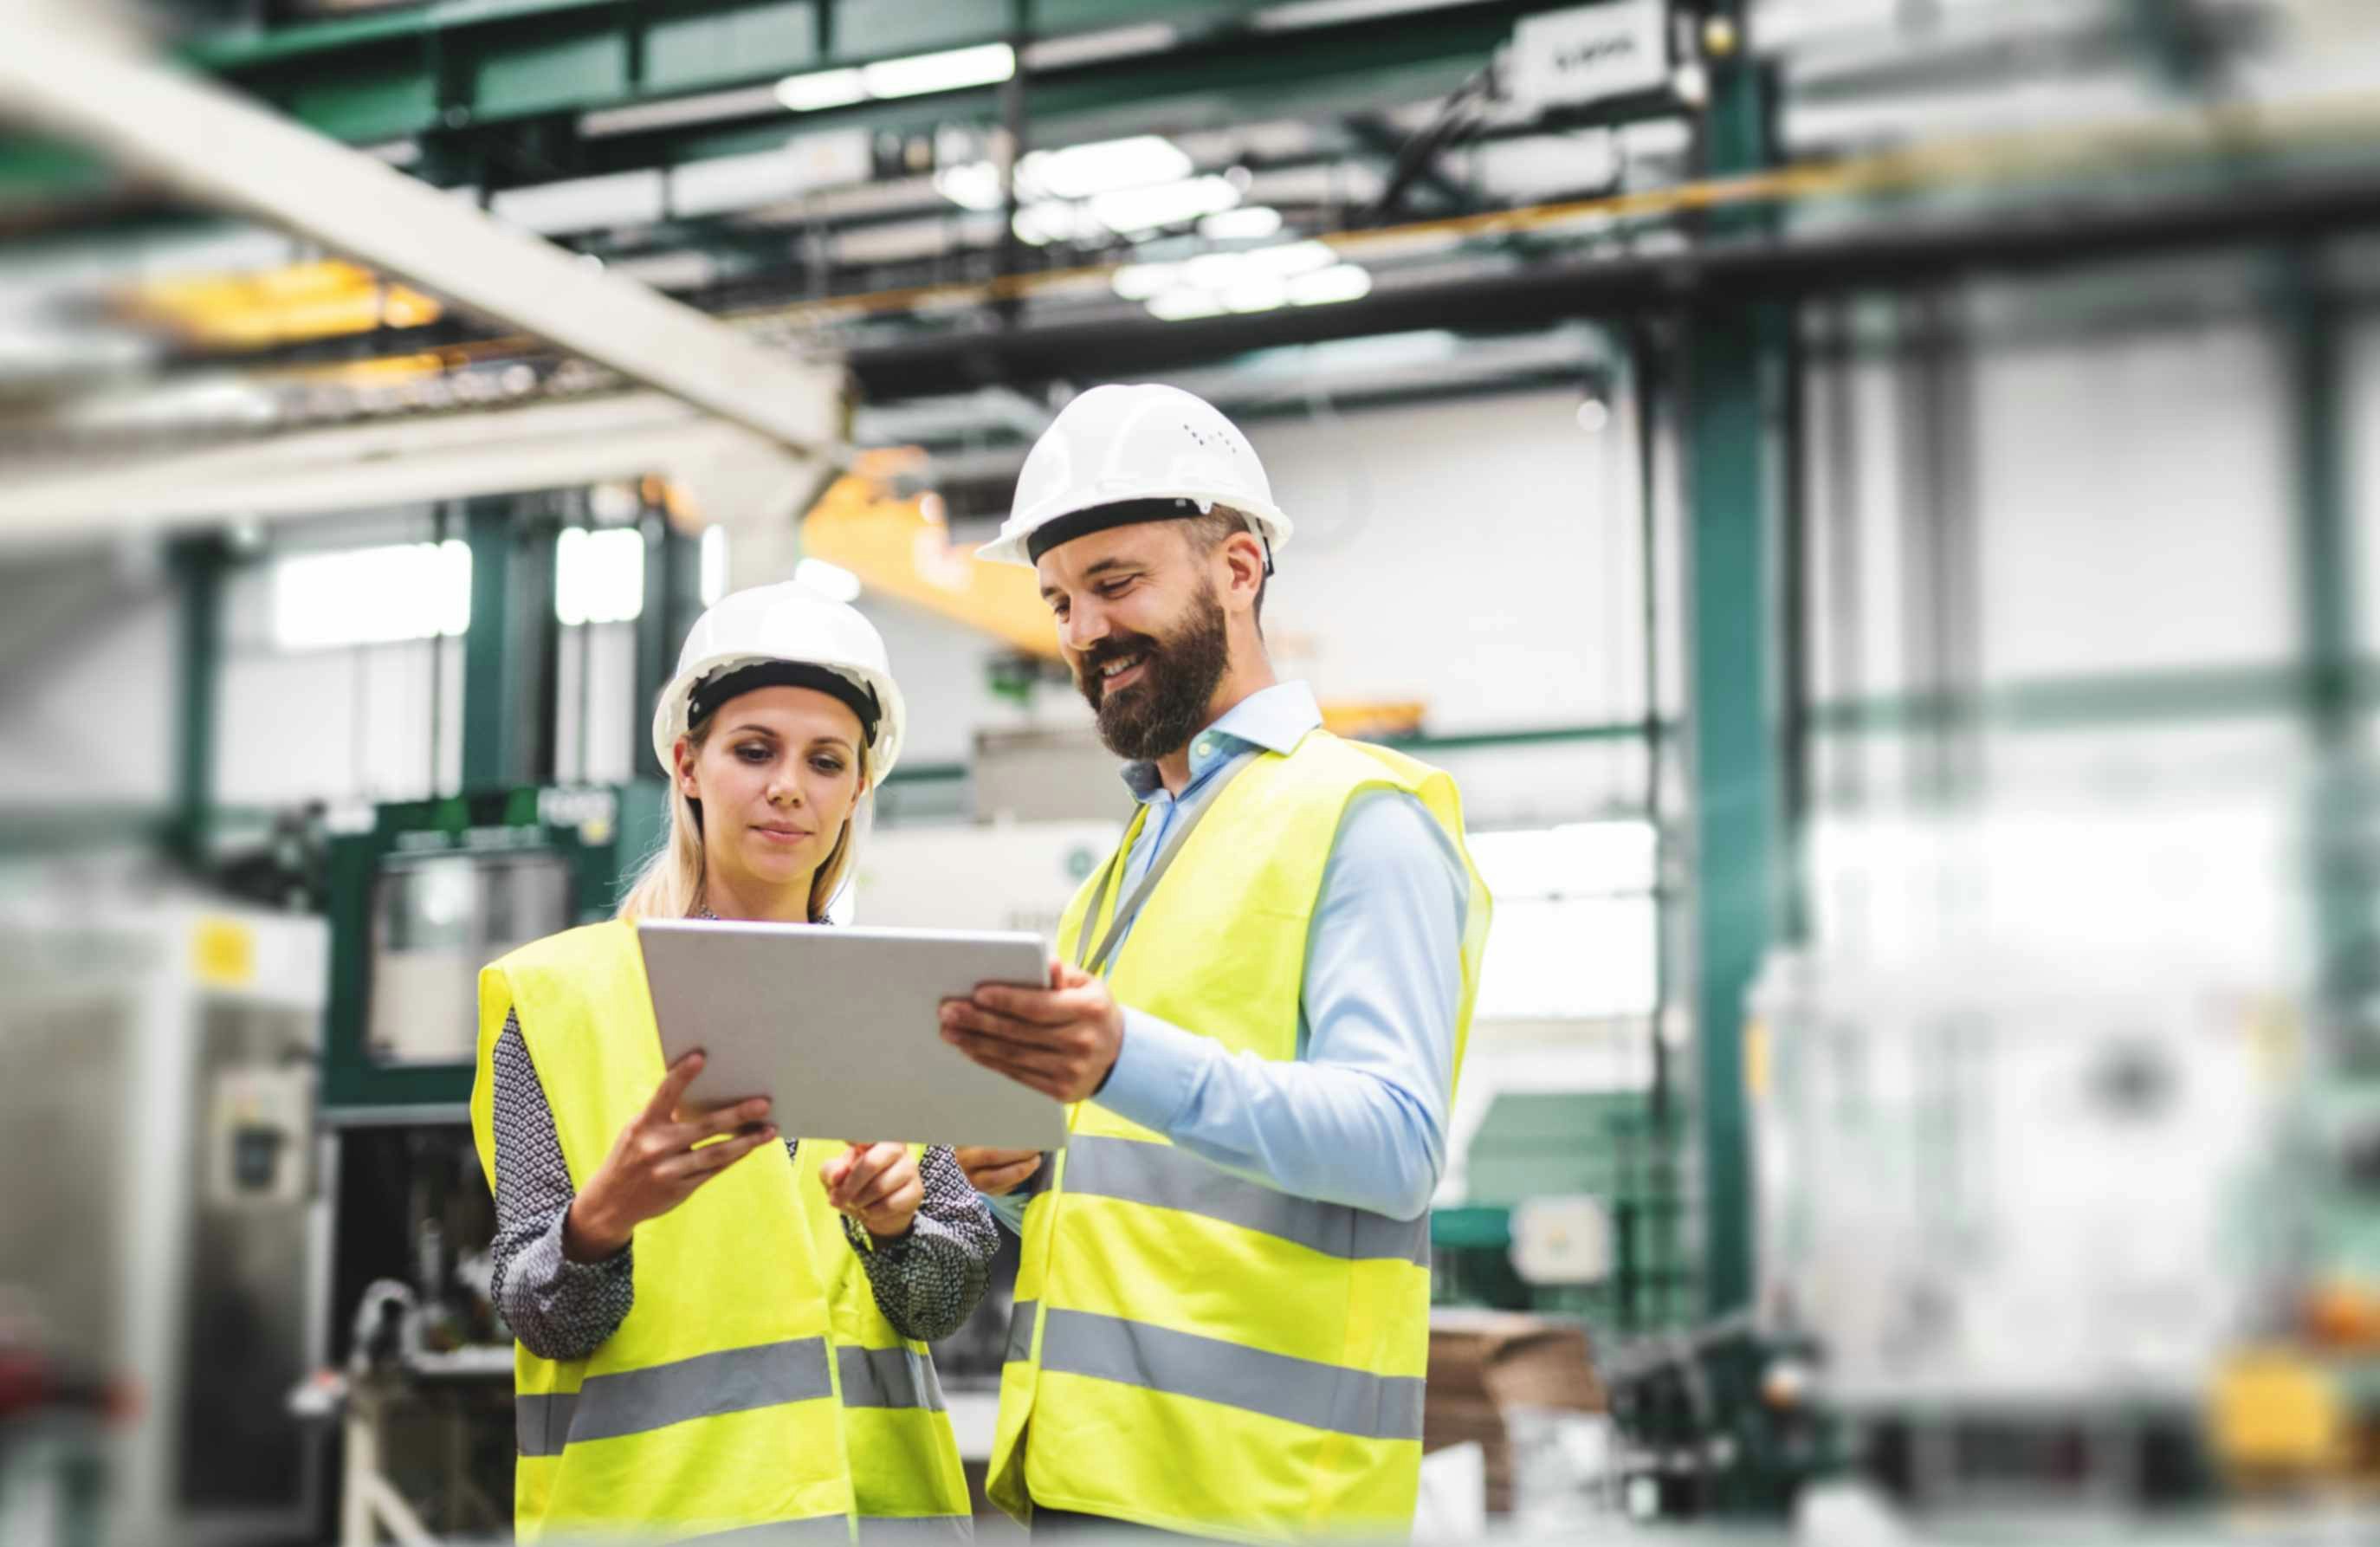 A man and a woman in hard hats and PPE looking at a tablet in a warehouse